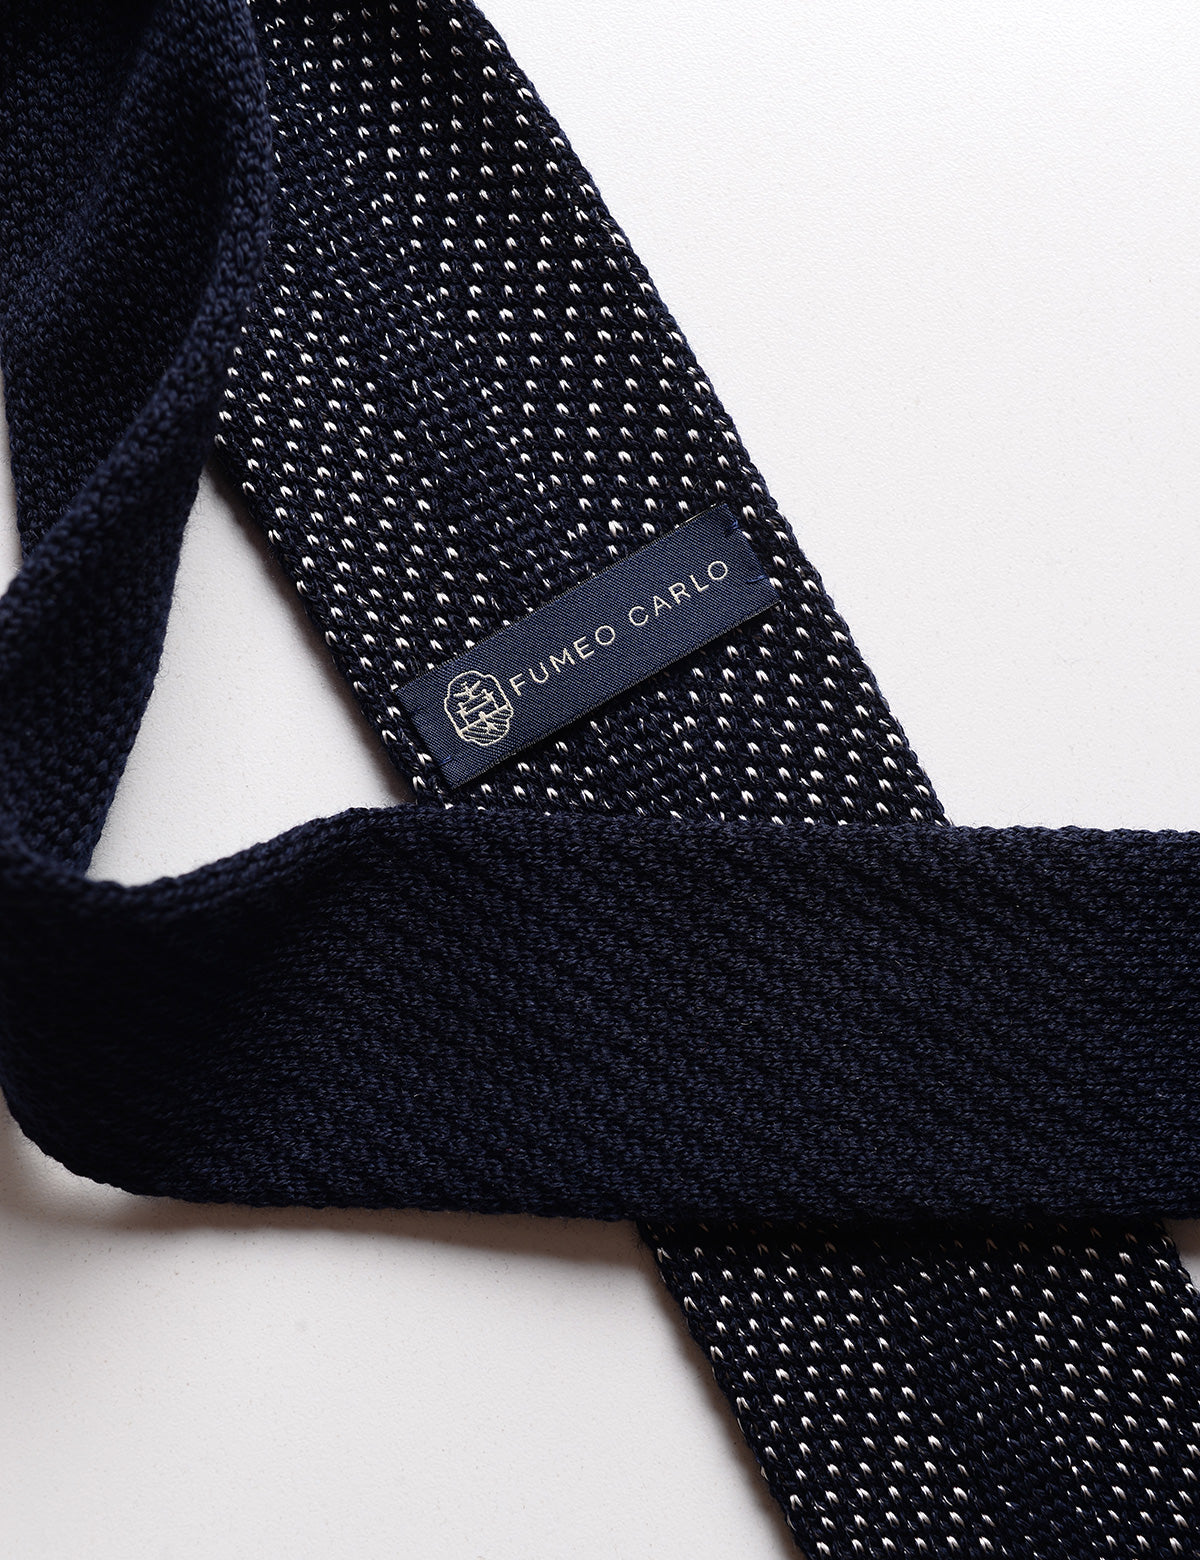 Detail of label and knit of Pincushion Silk & Wool Knit Tie - Night Sky